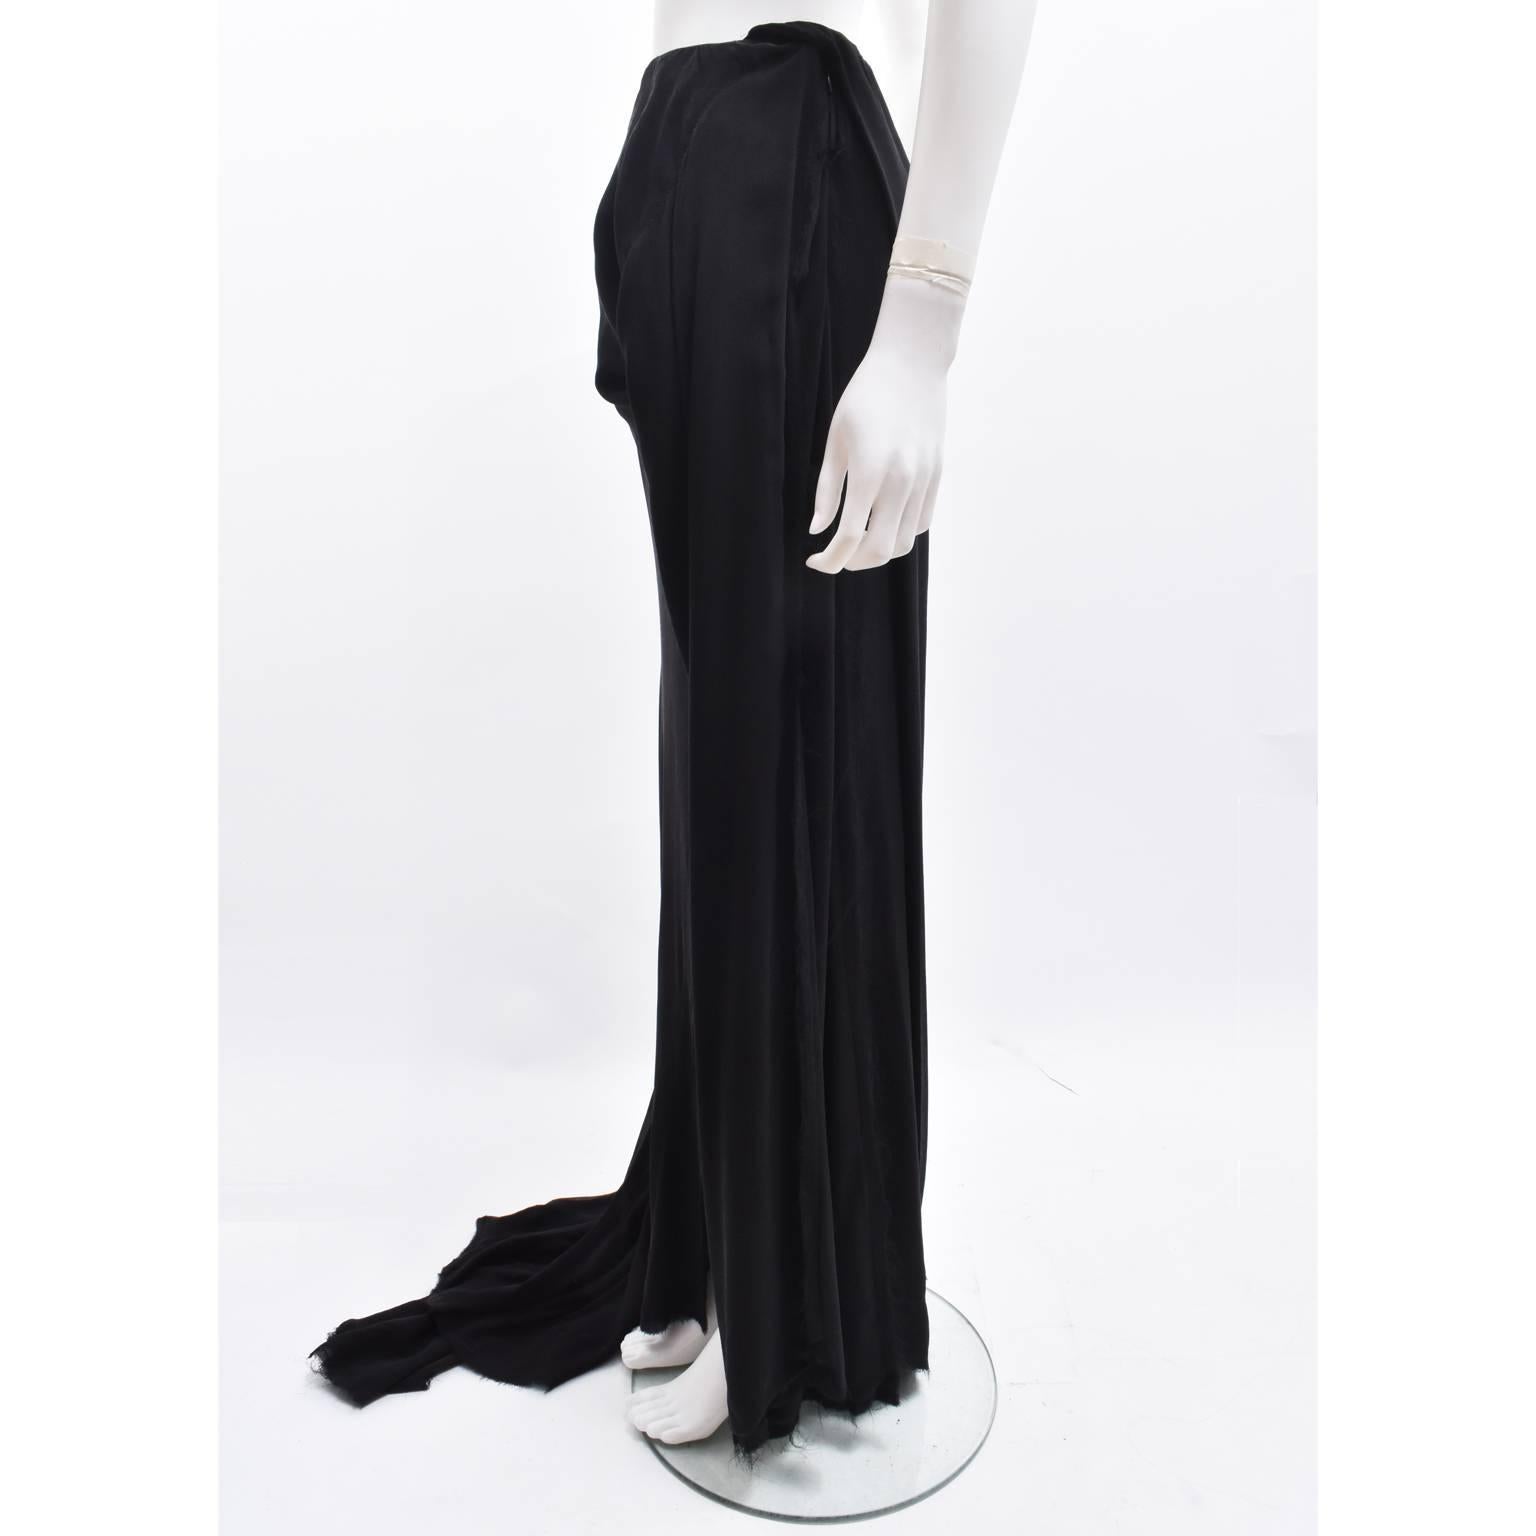 Vivienne Westwood ‘Acorn’ Black Asymmetric Skirt with Side Knot and Slit Details In Excellent Condition For Sale In London, GB